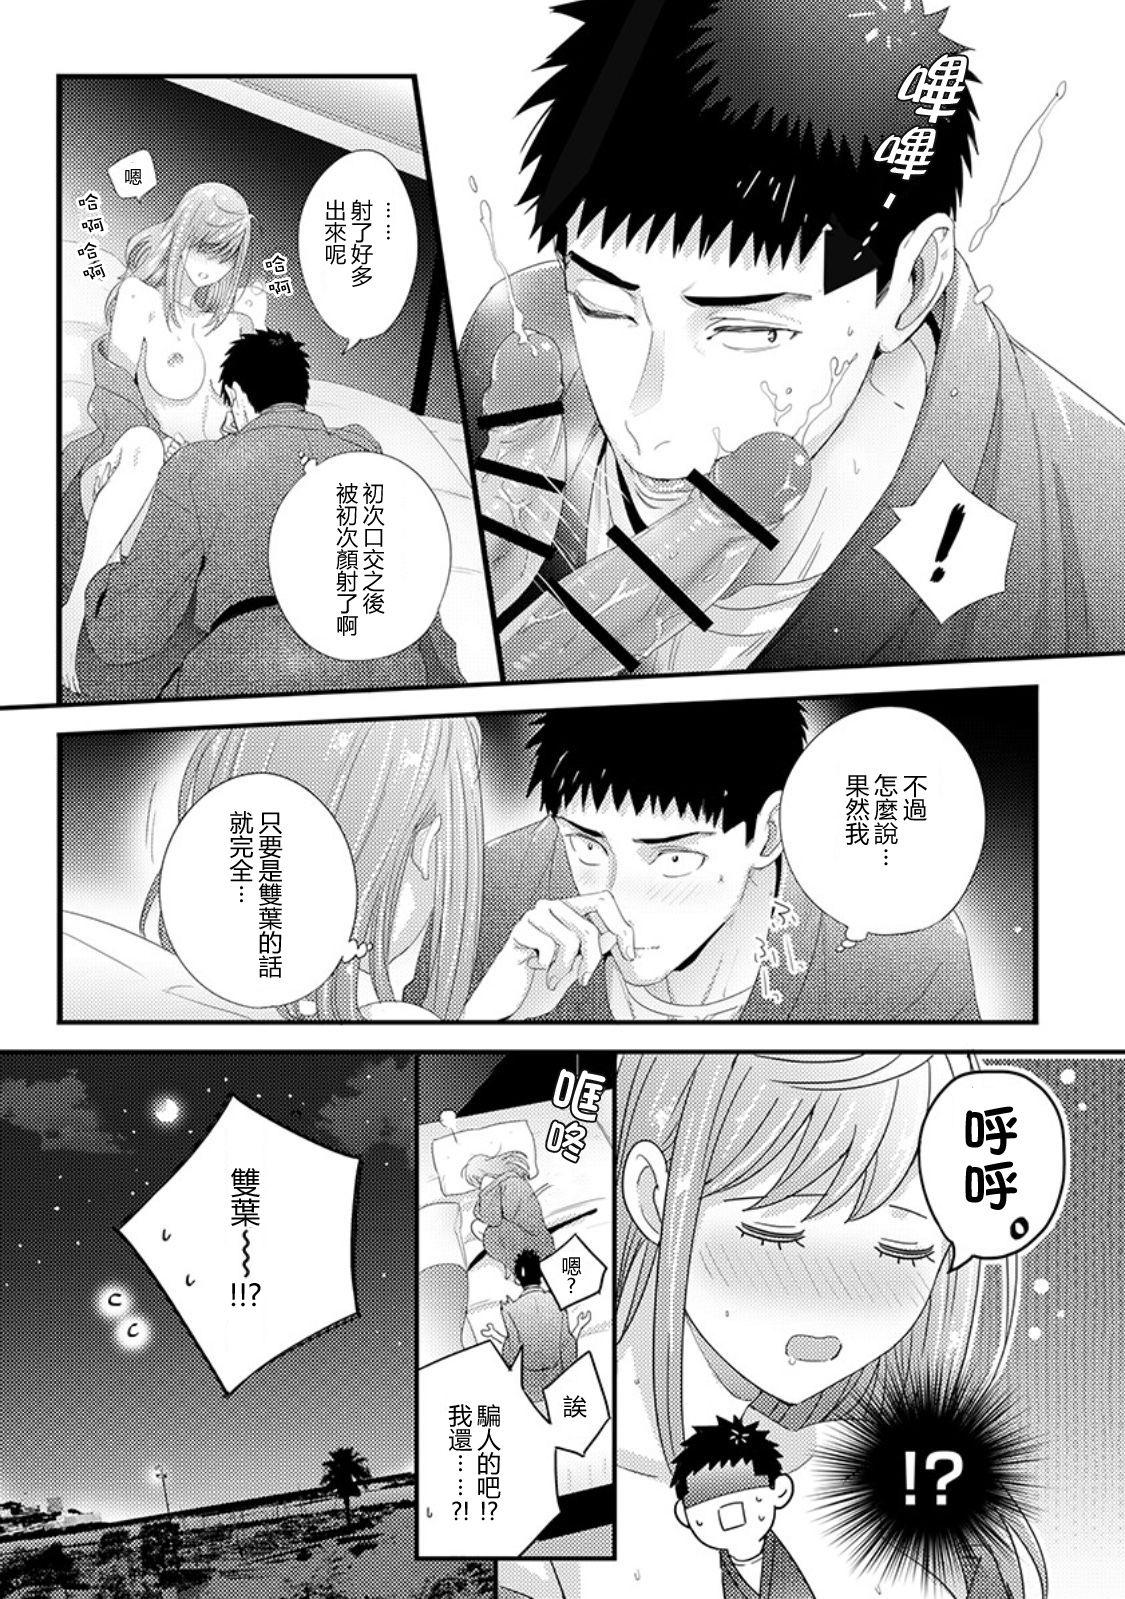 Please Let Me Hold You Futaba-San! Ch.1 22